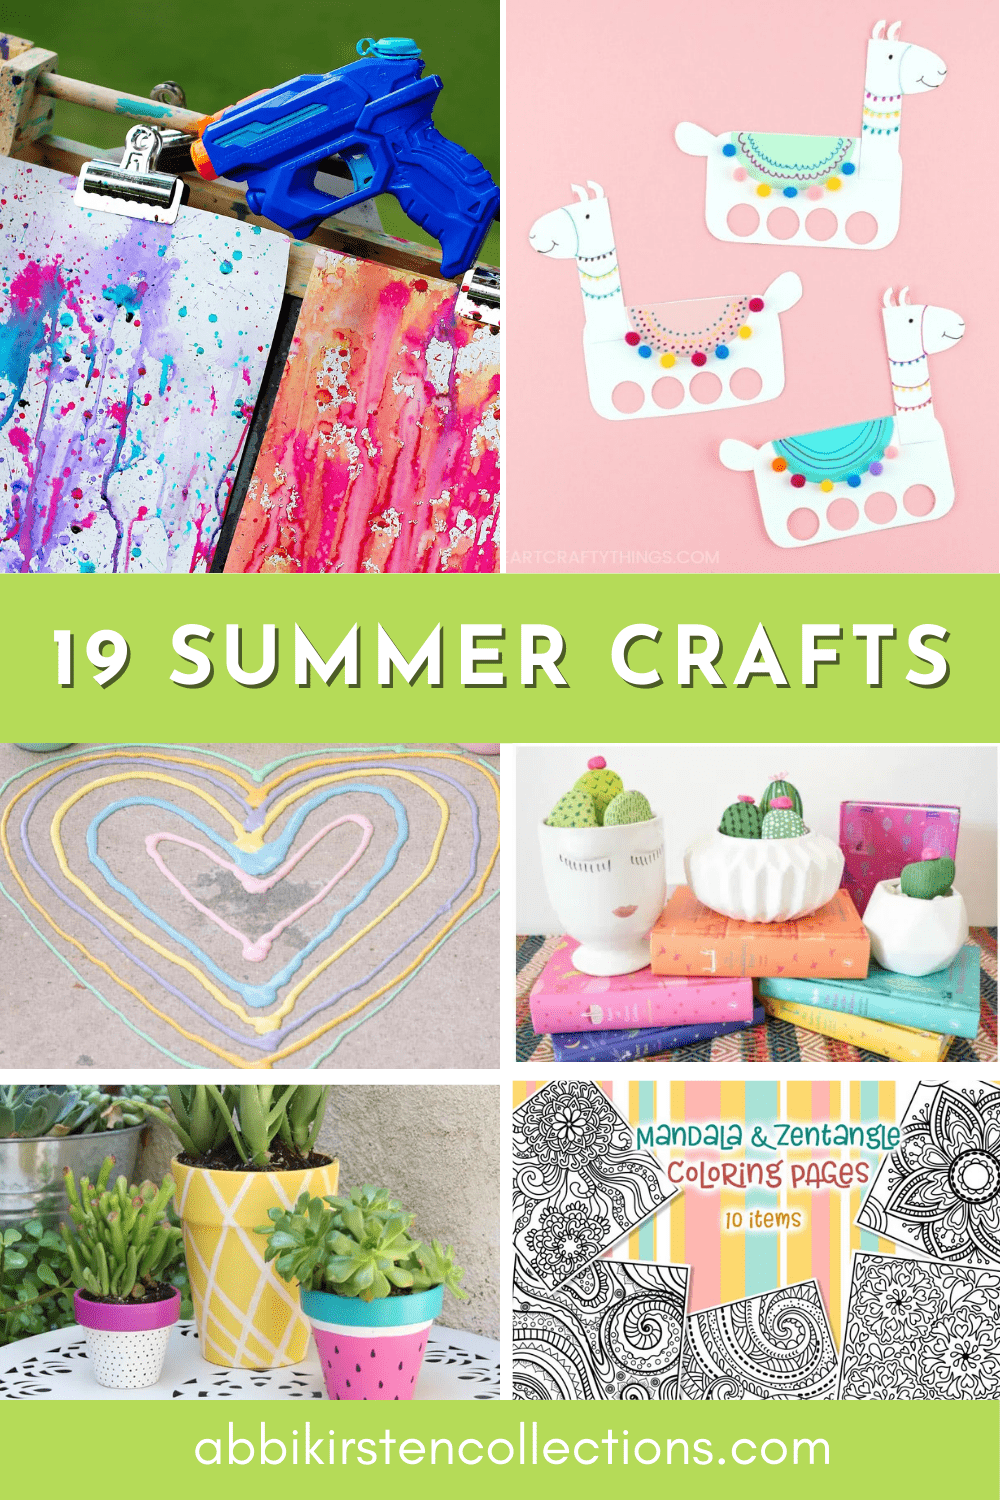 19 Fun, Easy Crafts for Toddlers